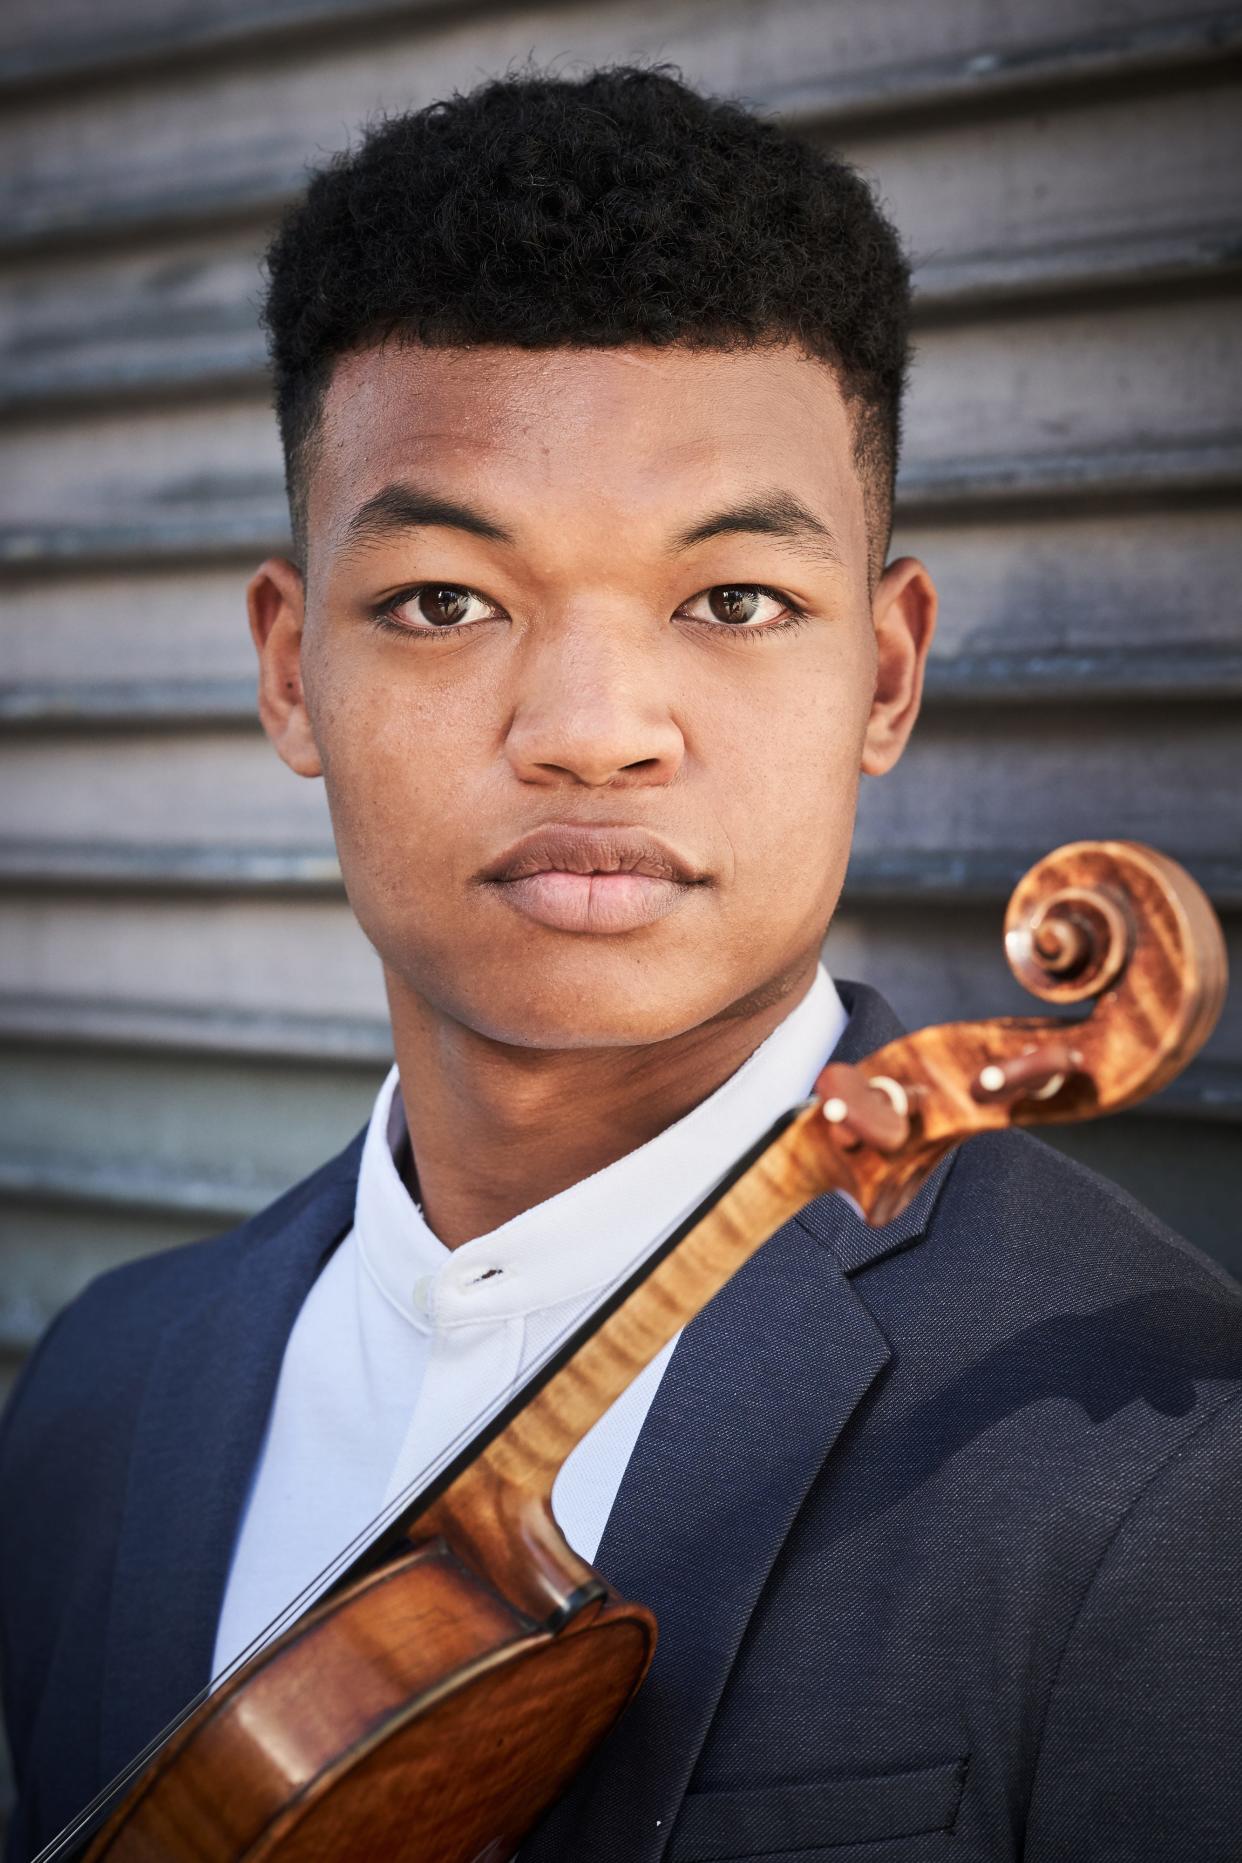 Violinist Randall Goosby will join the Cincinnati Symphony Orchestra and guest conductor Cristian Măcelaru on Feb. 8-9, 2025, in a program that combines the familiar – Dvořák’s “Symphony No. 9, From the New World” – with rarely performed works like Florence Price’s "Violin Concerto No. 2” and Ernest Chausson’s “Poème.”